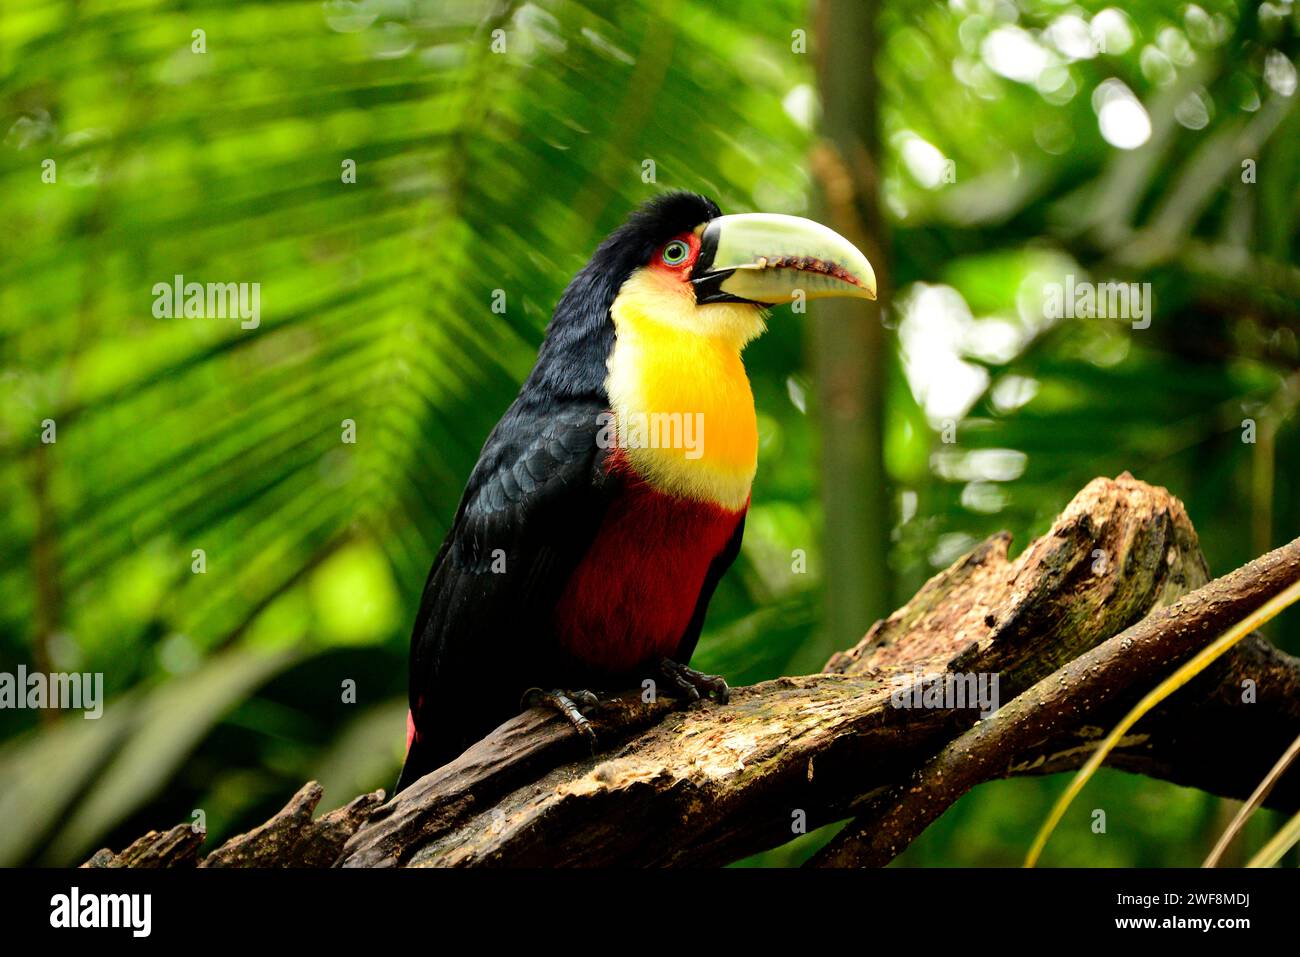 Green-billed toucan (Ramphastos dicolorus) is a colorful bird native to Argentina, Bolivia, Brazil and Paraguay. This photo was taken in Iguazu, Brazi Stock Photo